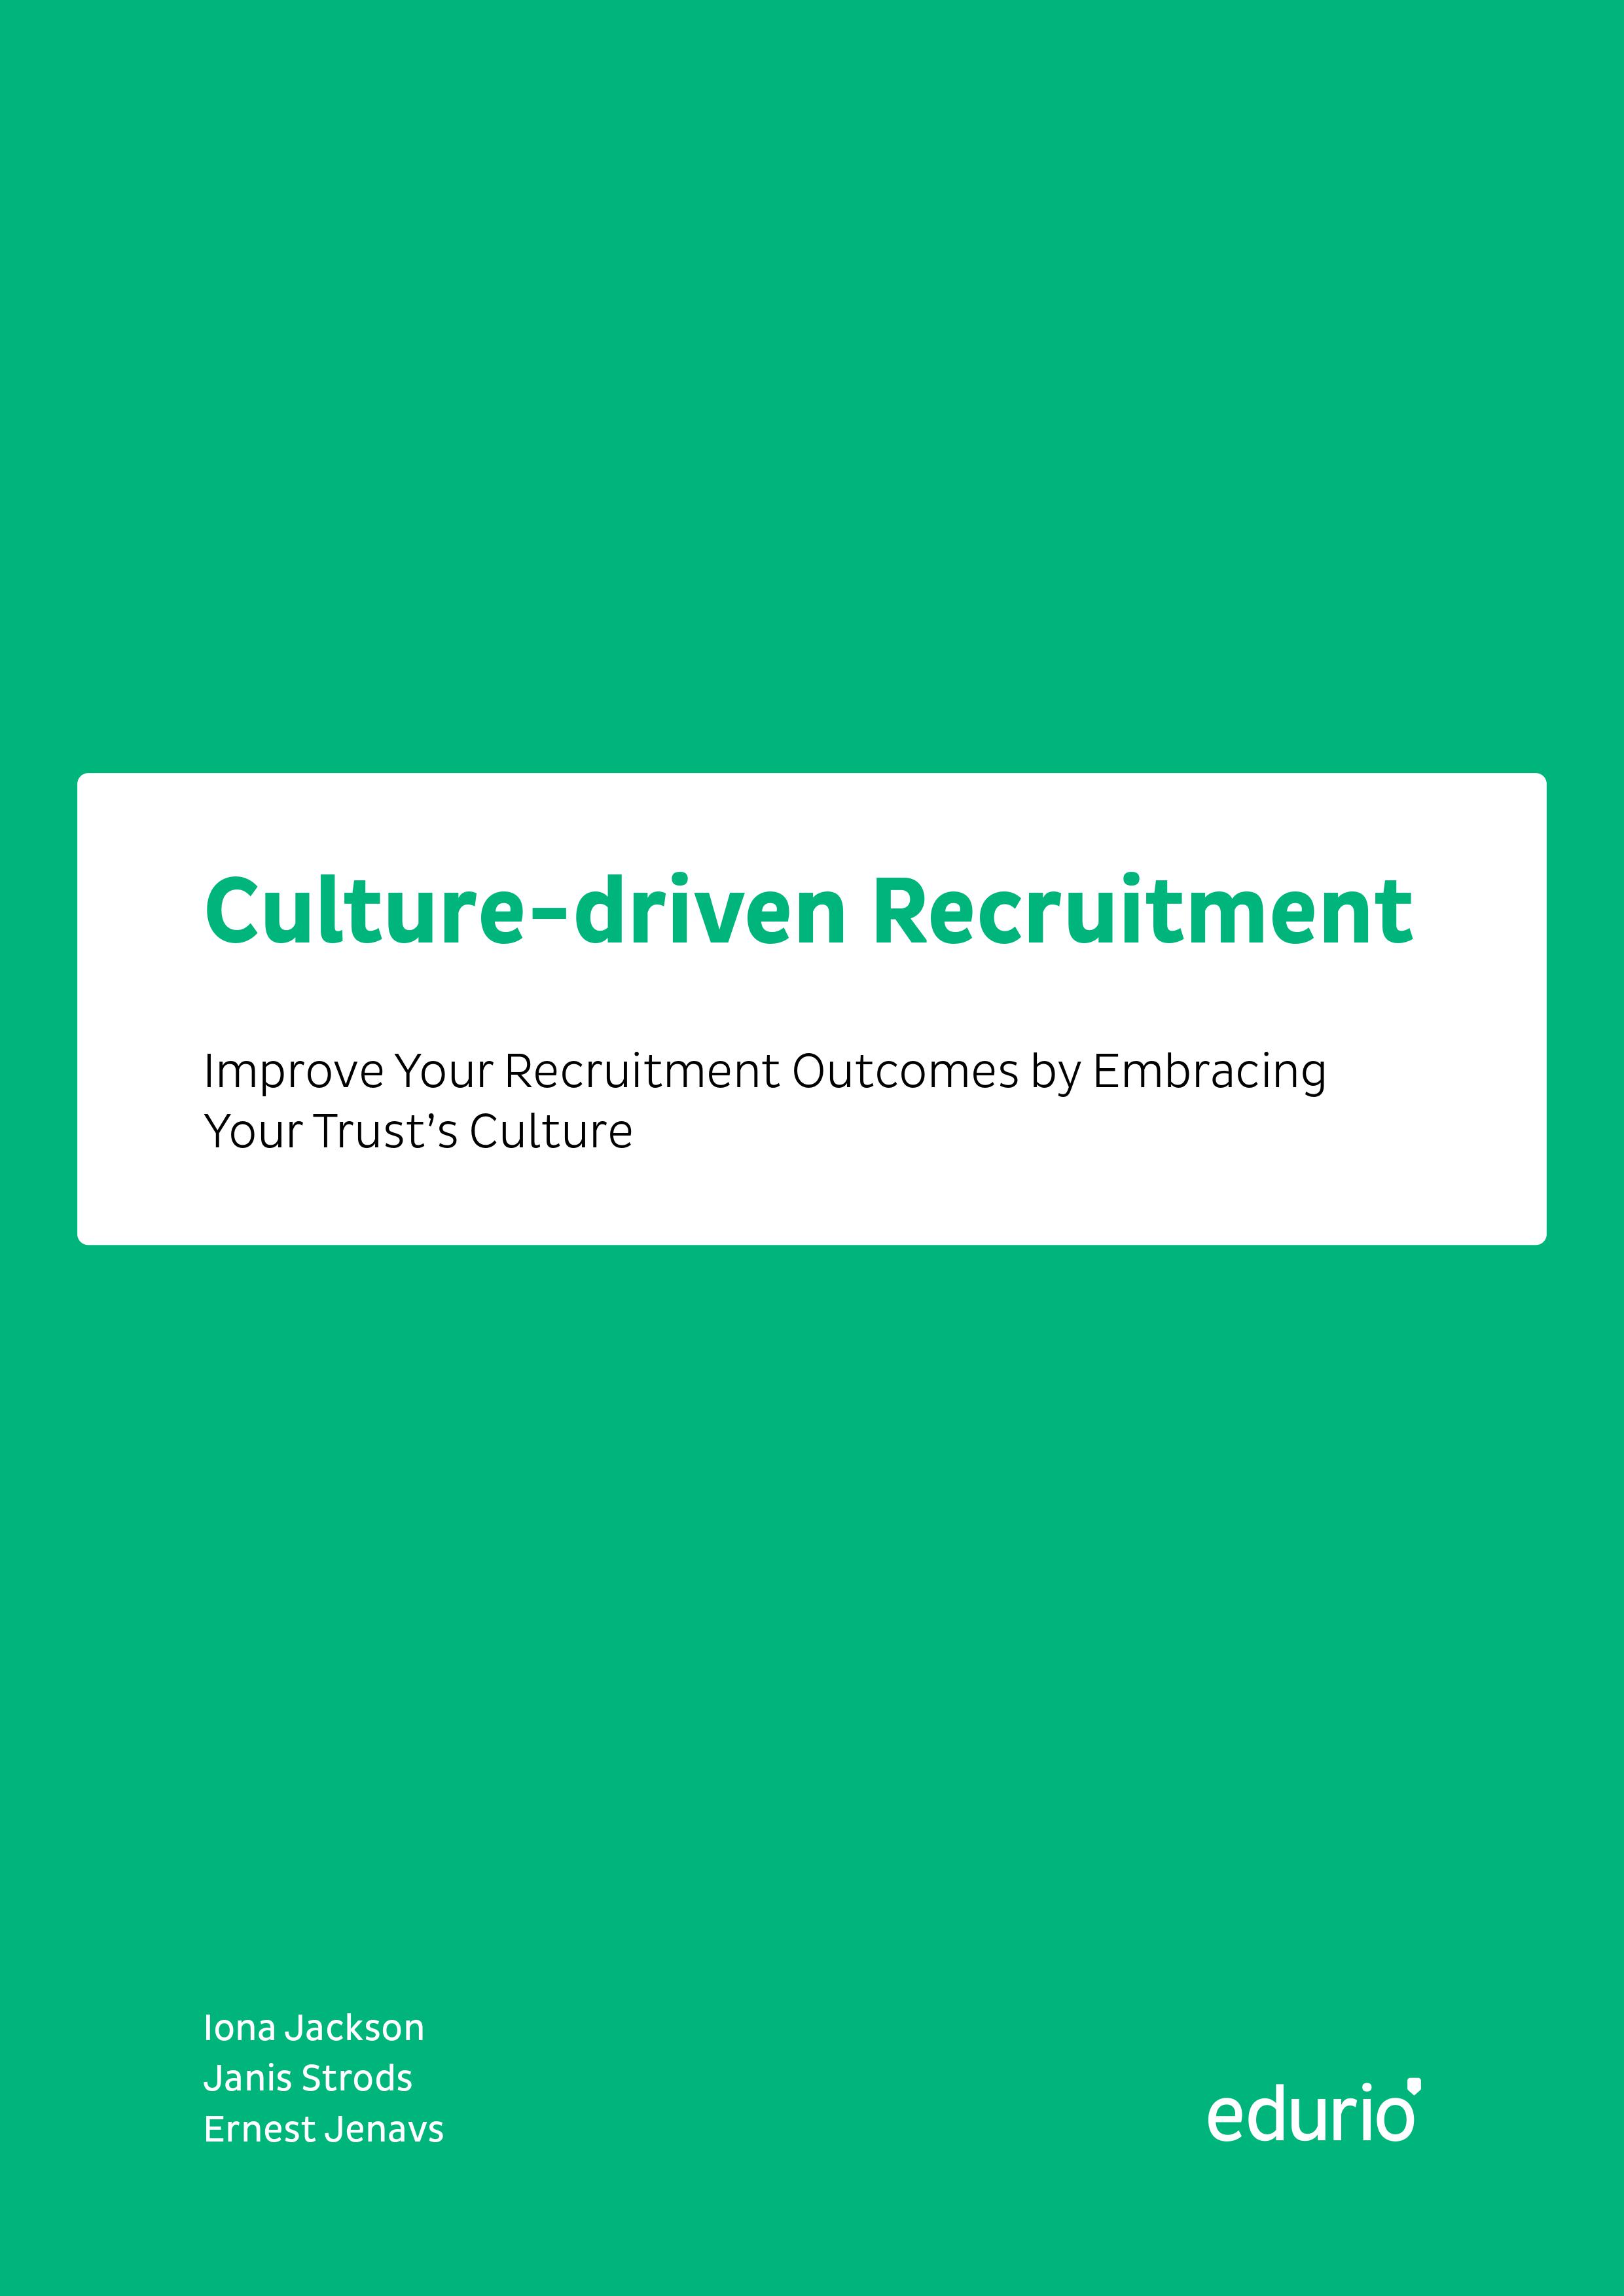 Culture-driven Recruitment guide | Improve Your Recruitment Outcomes by Embracing Your Trust’s Culture